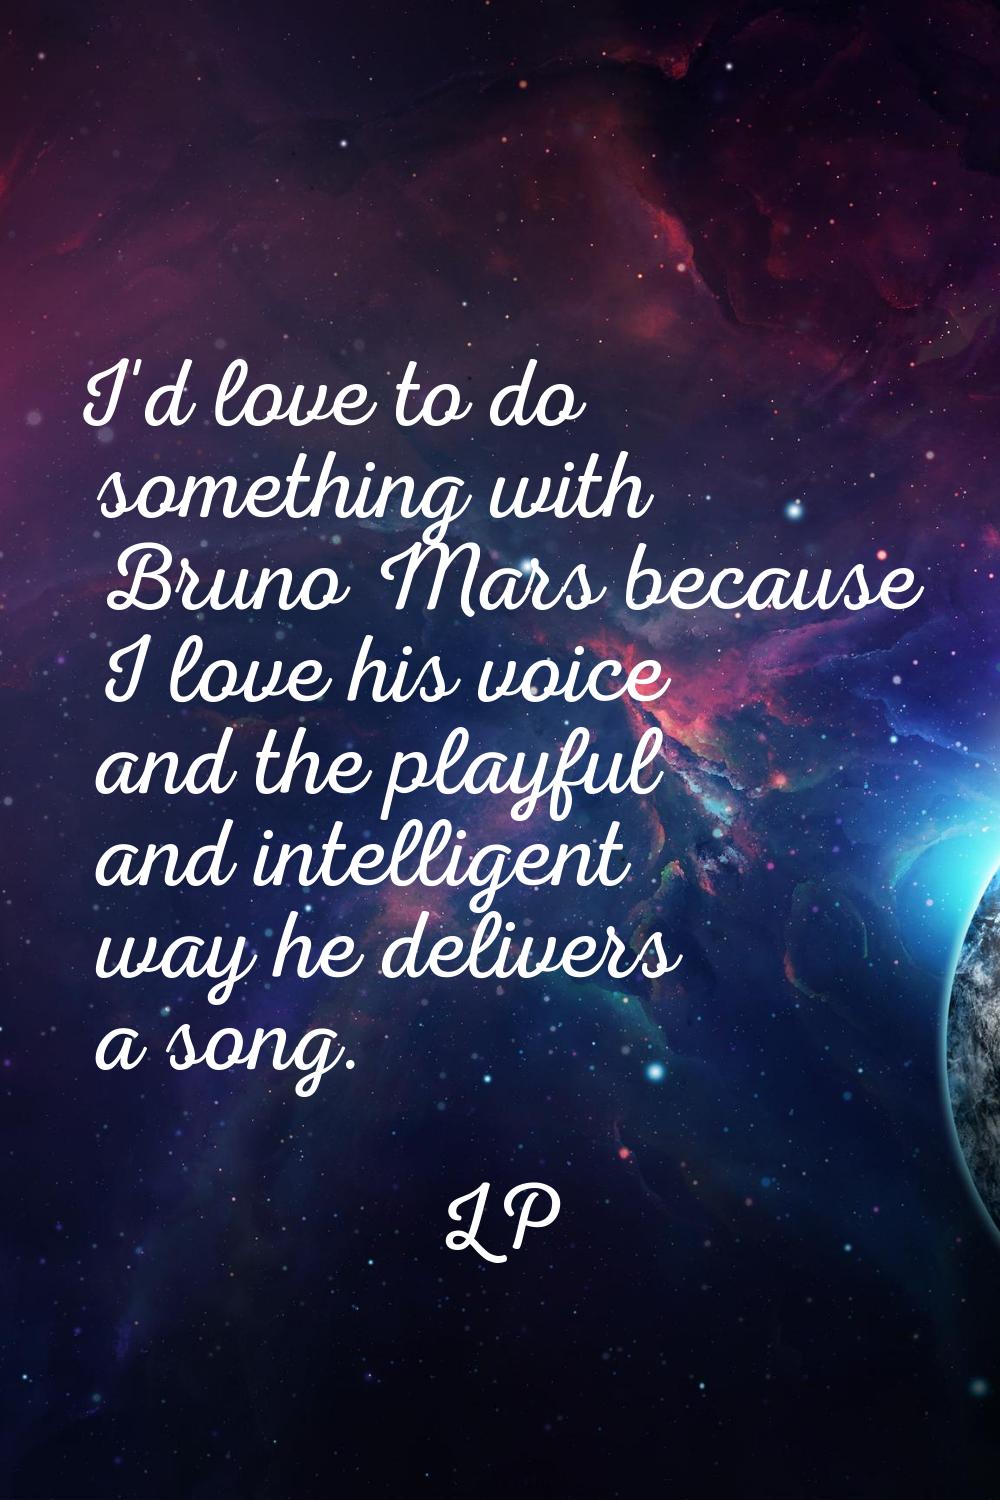 I'd love to do something with Bruno Mars because I love his voice and the playful and intelligent w